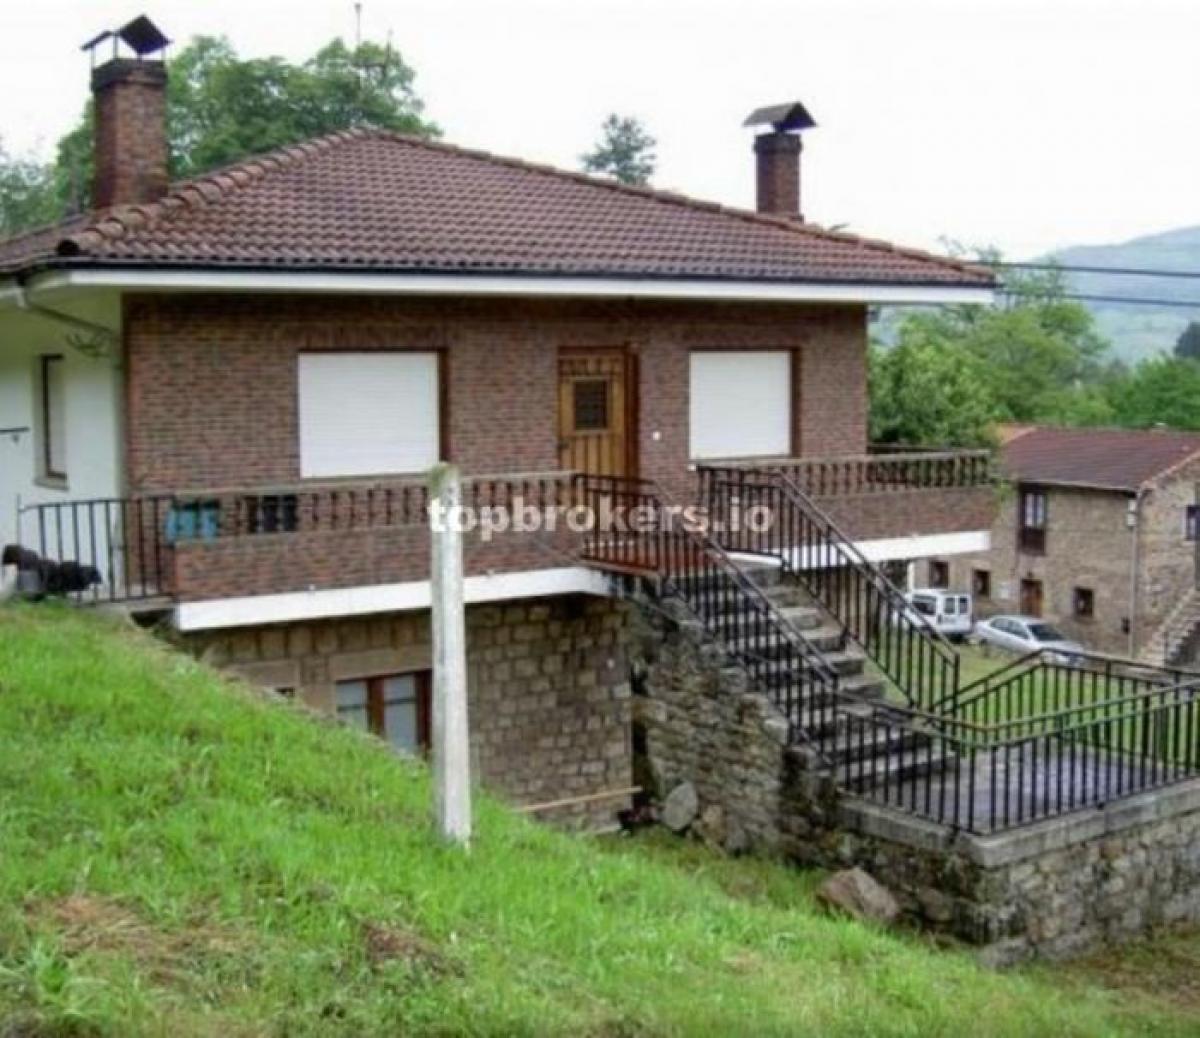 Picture of Home For Sale in Molledo, Asturias, Spain